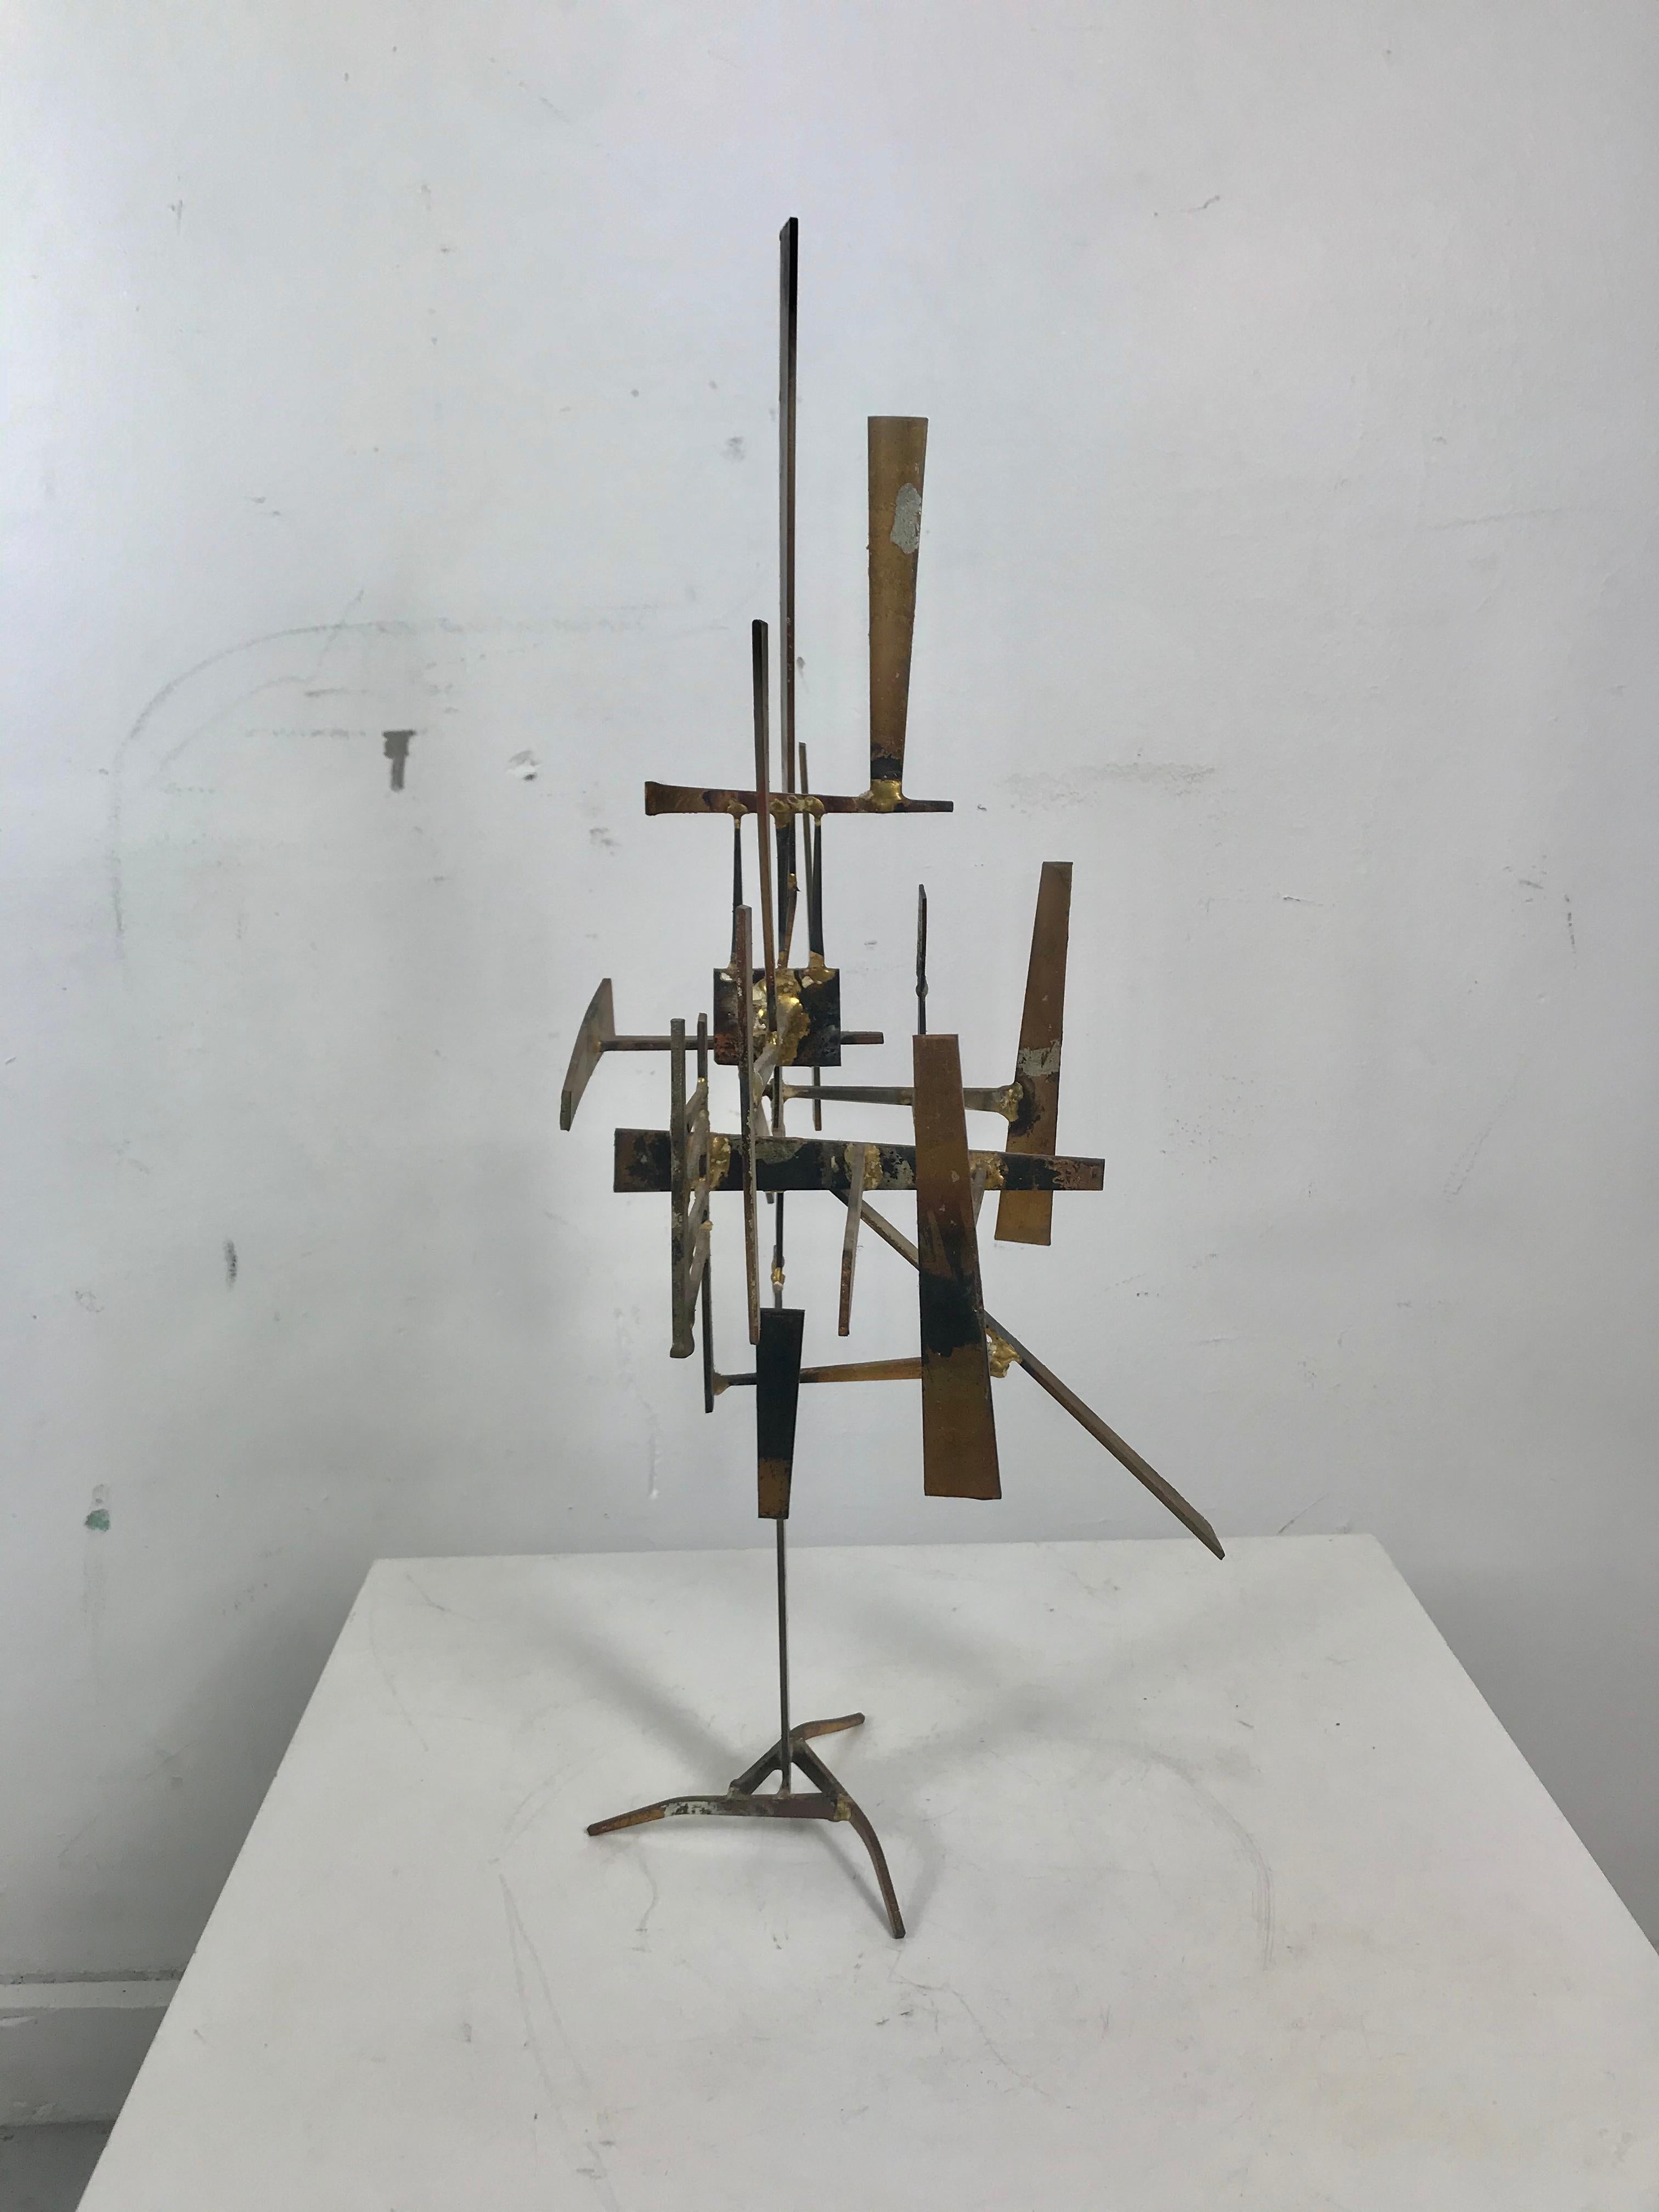 American Modernist Welded Metal Abstract Brutalist Table Sculpture by William Bowie